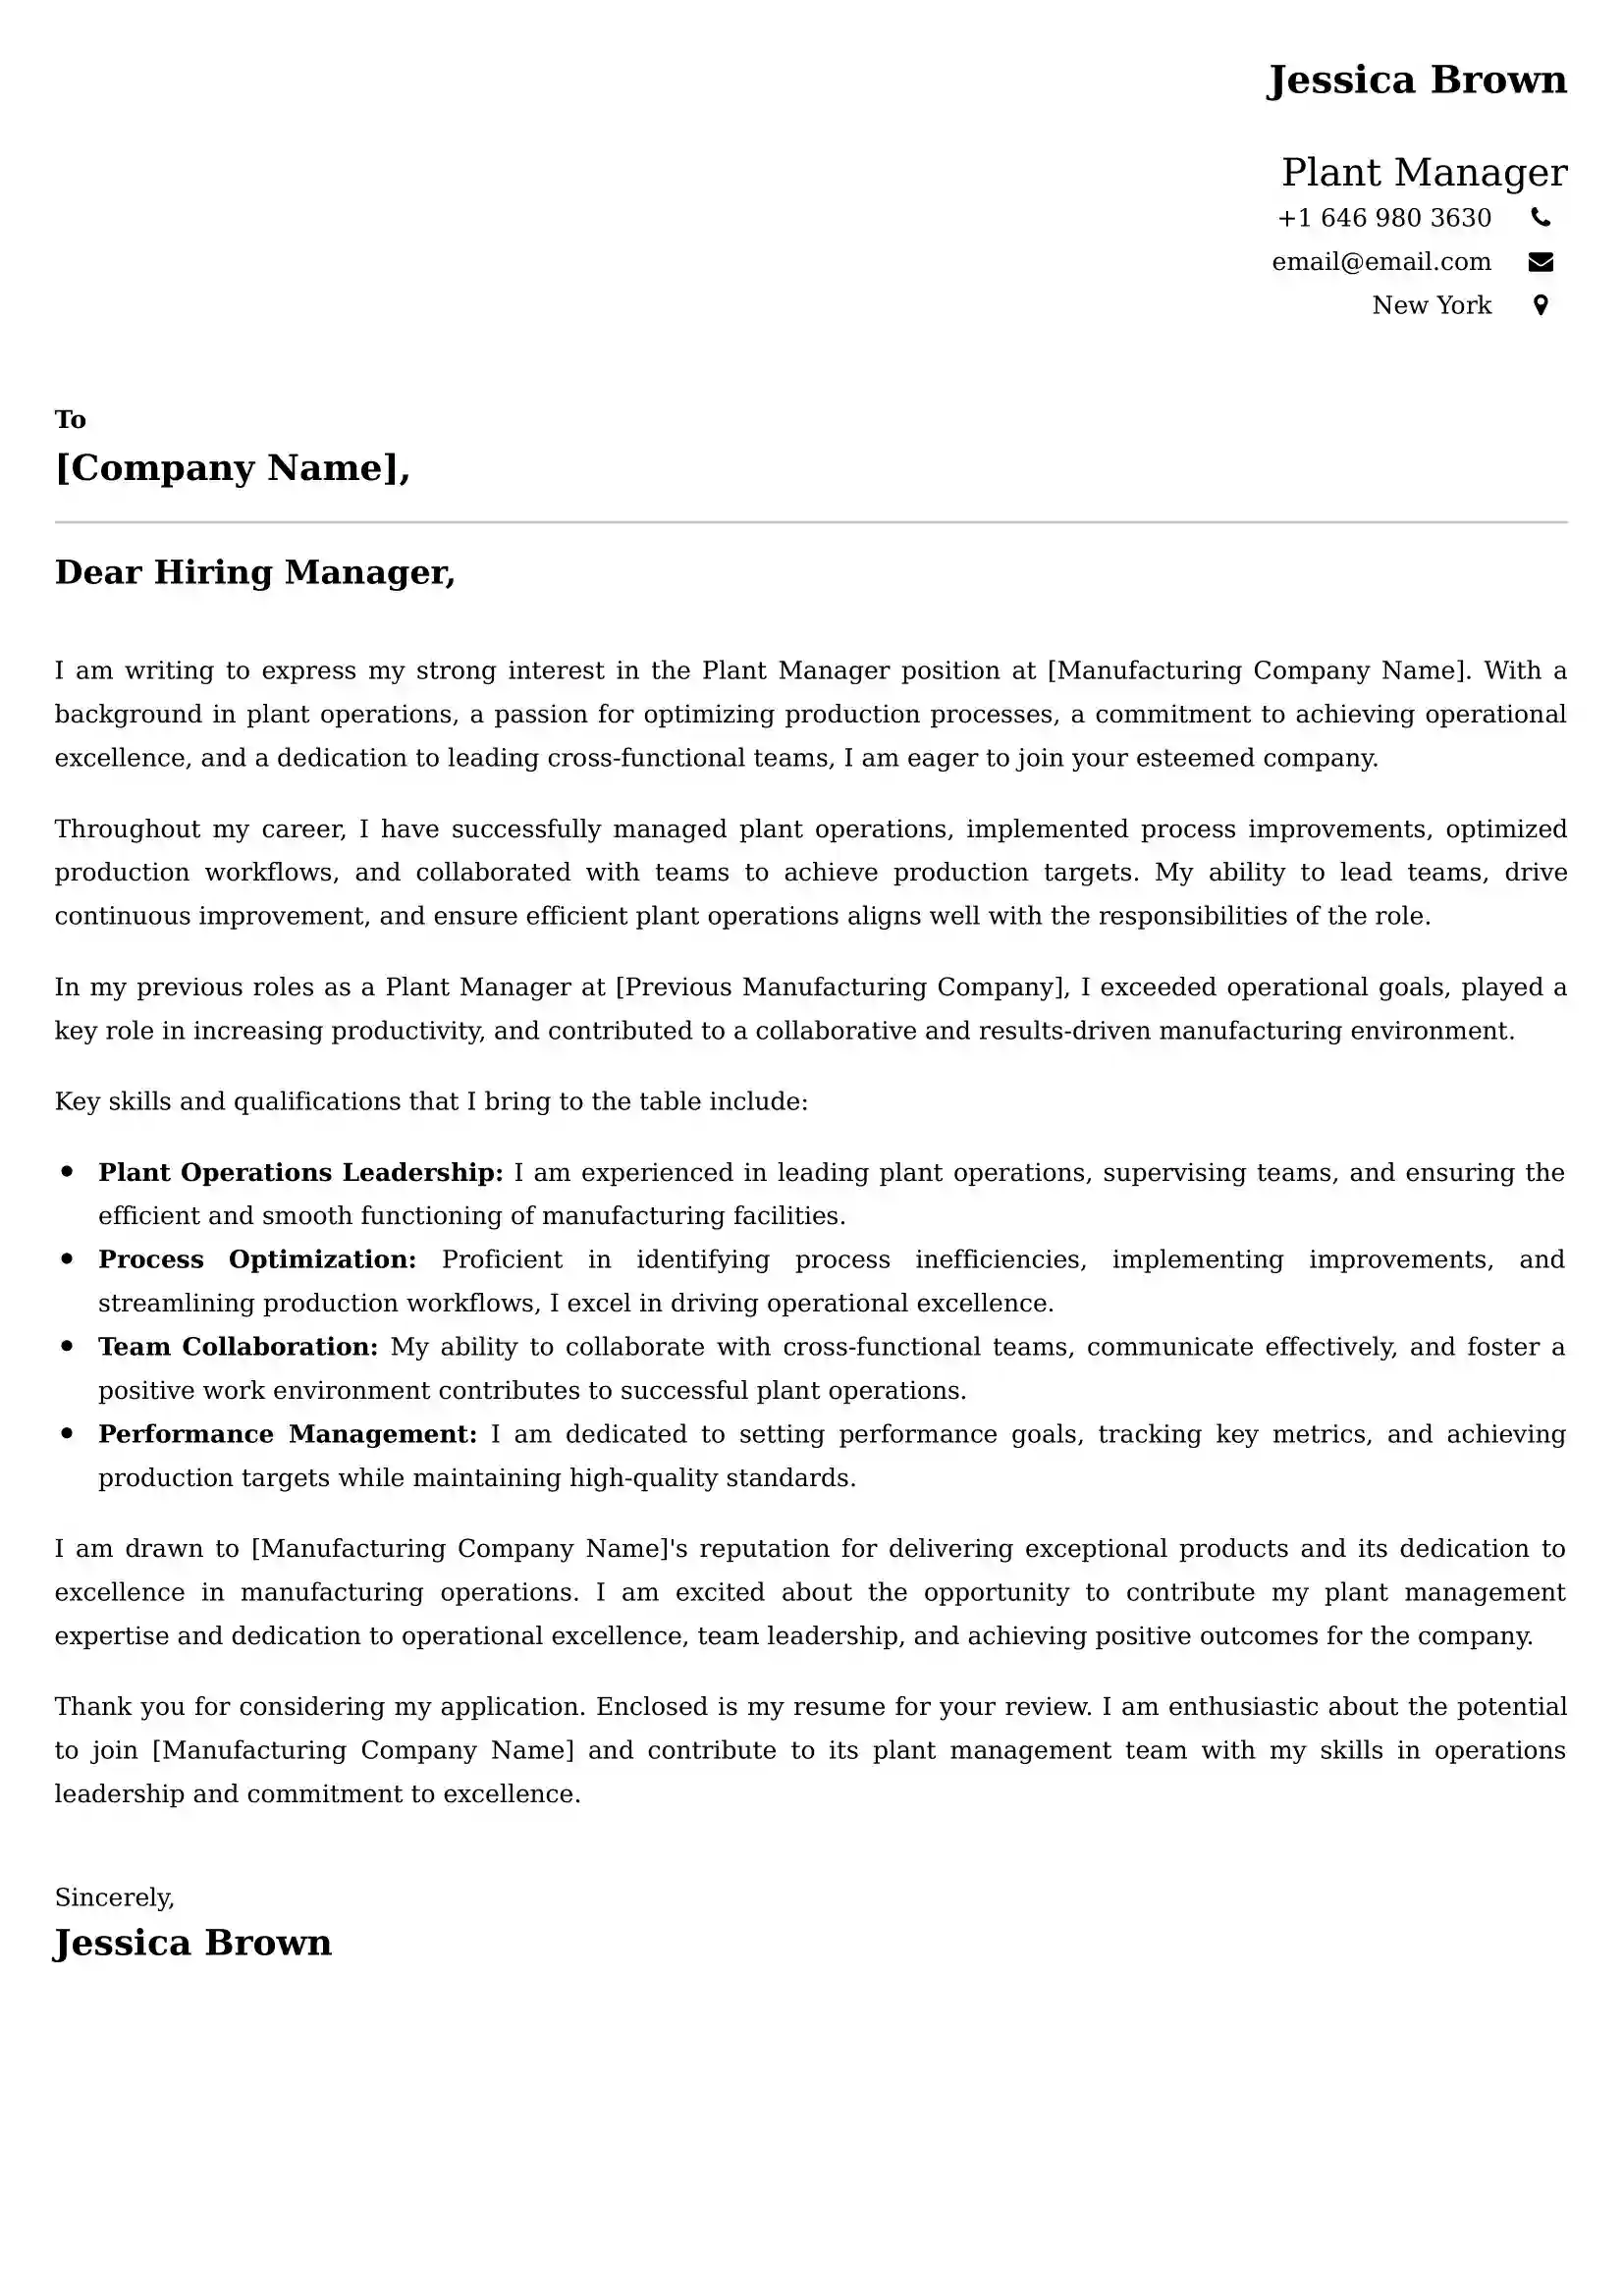 Plant Manager Cover Letter Examples for UK 